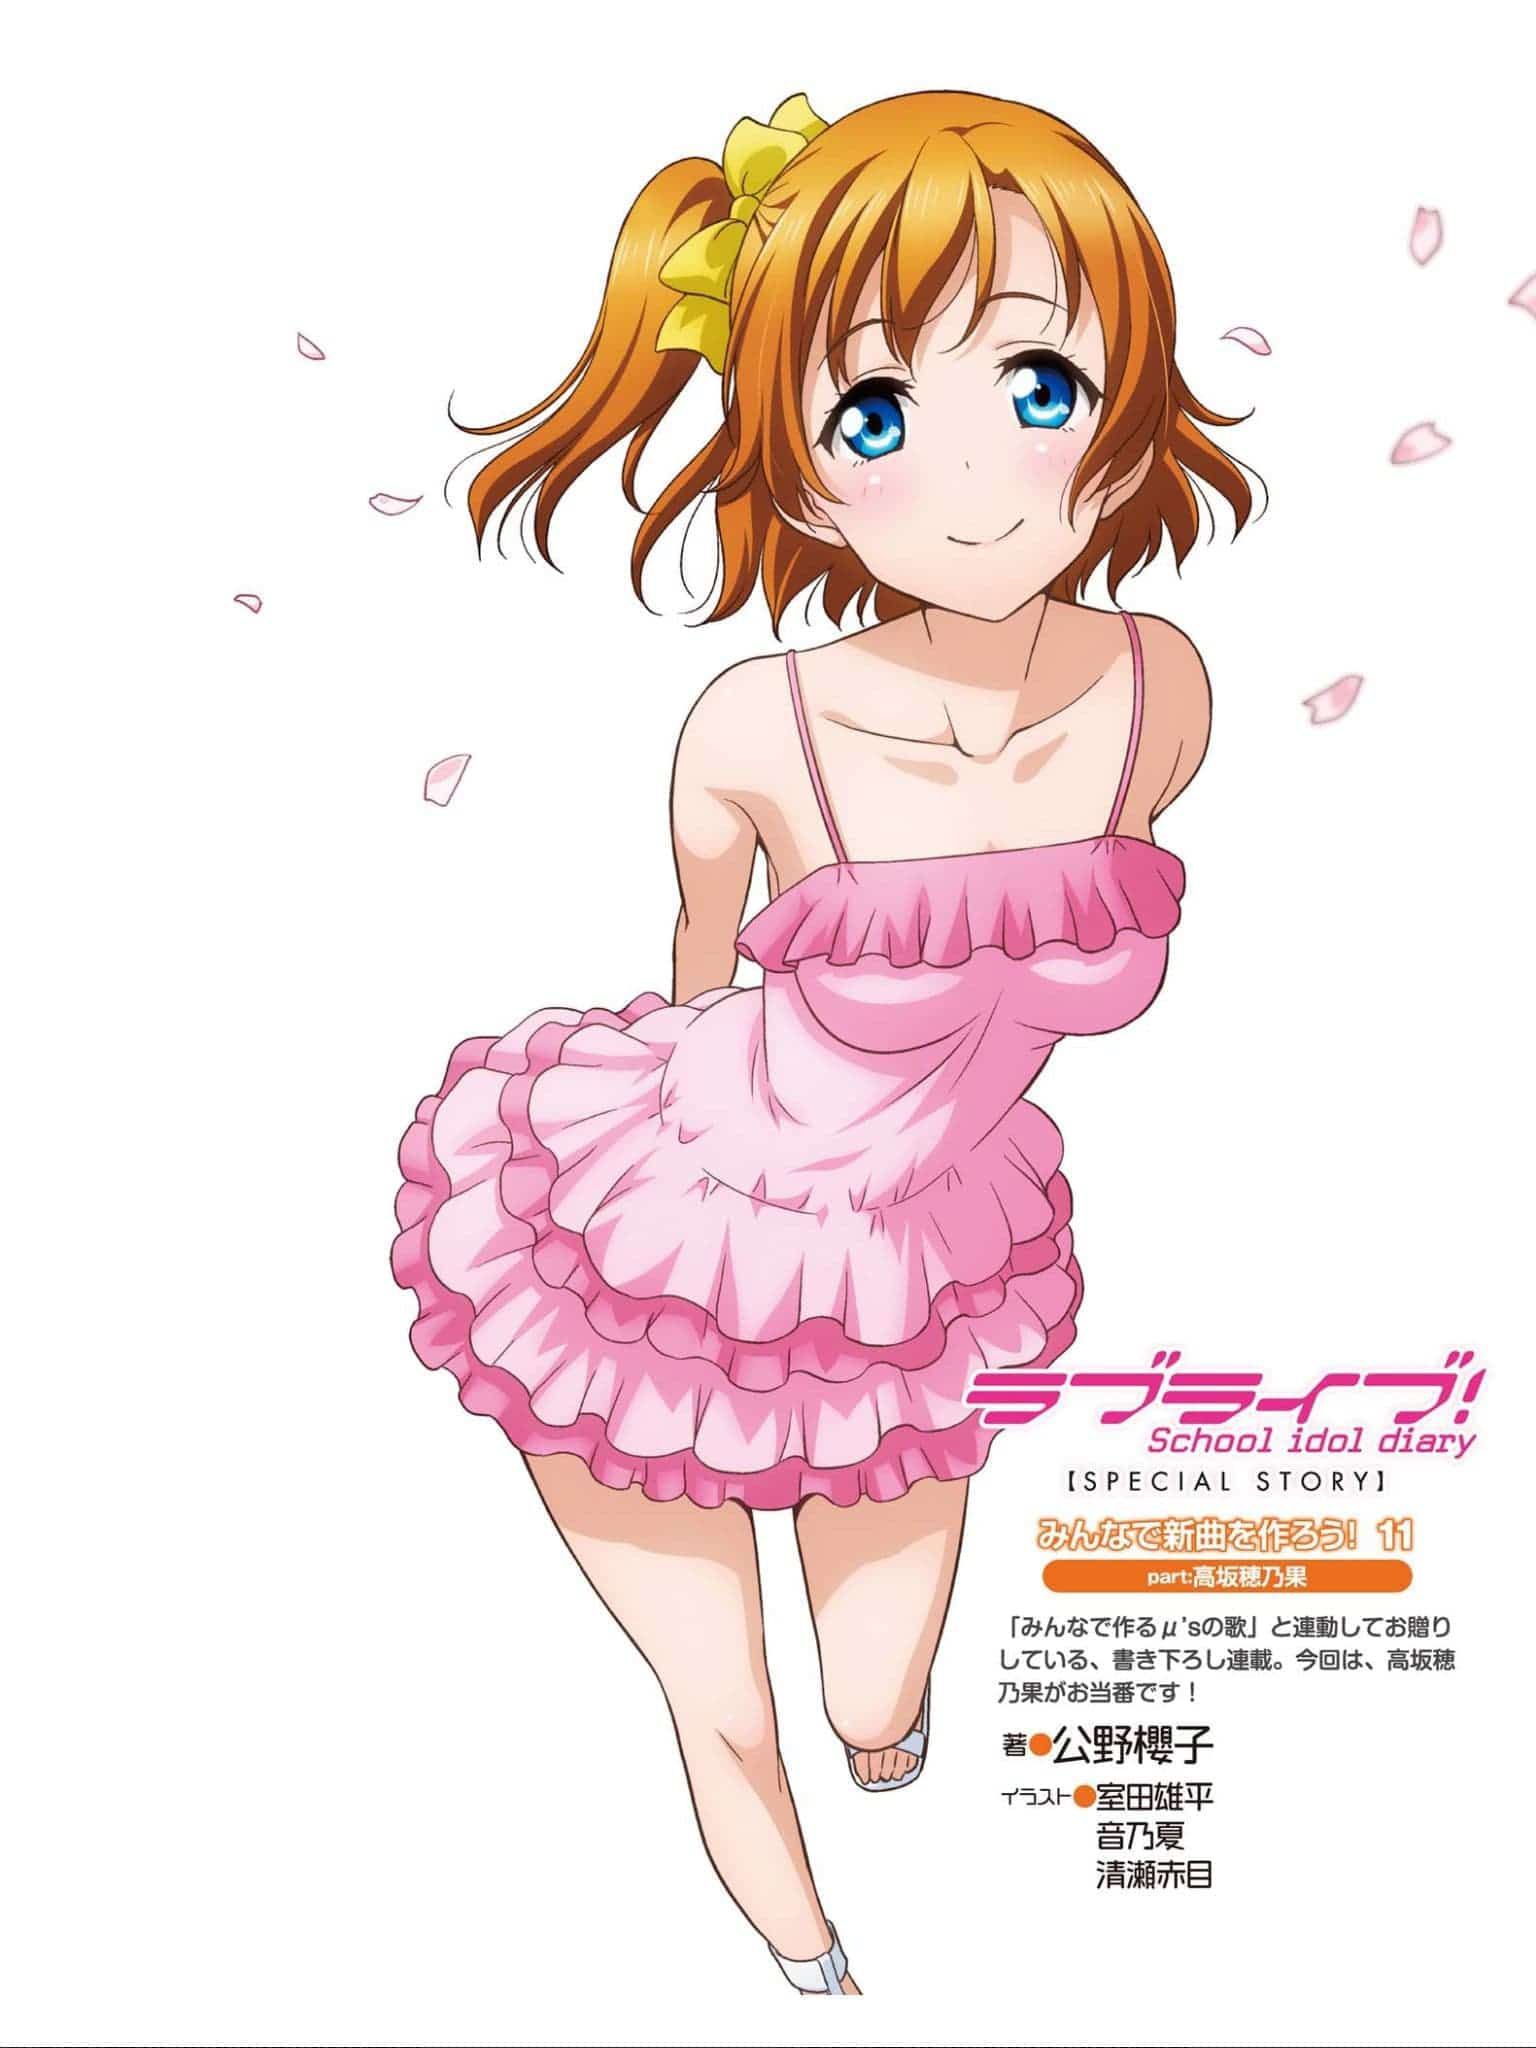 【Love Live】 Μ's (Muse) Member's Carefully Selected Erotic Images Total 191st Bullet 18